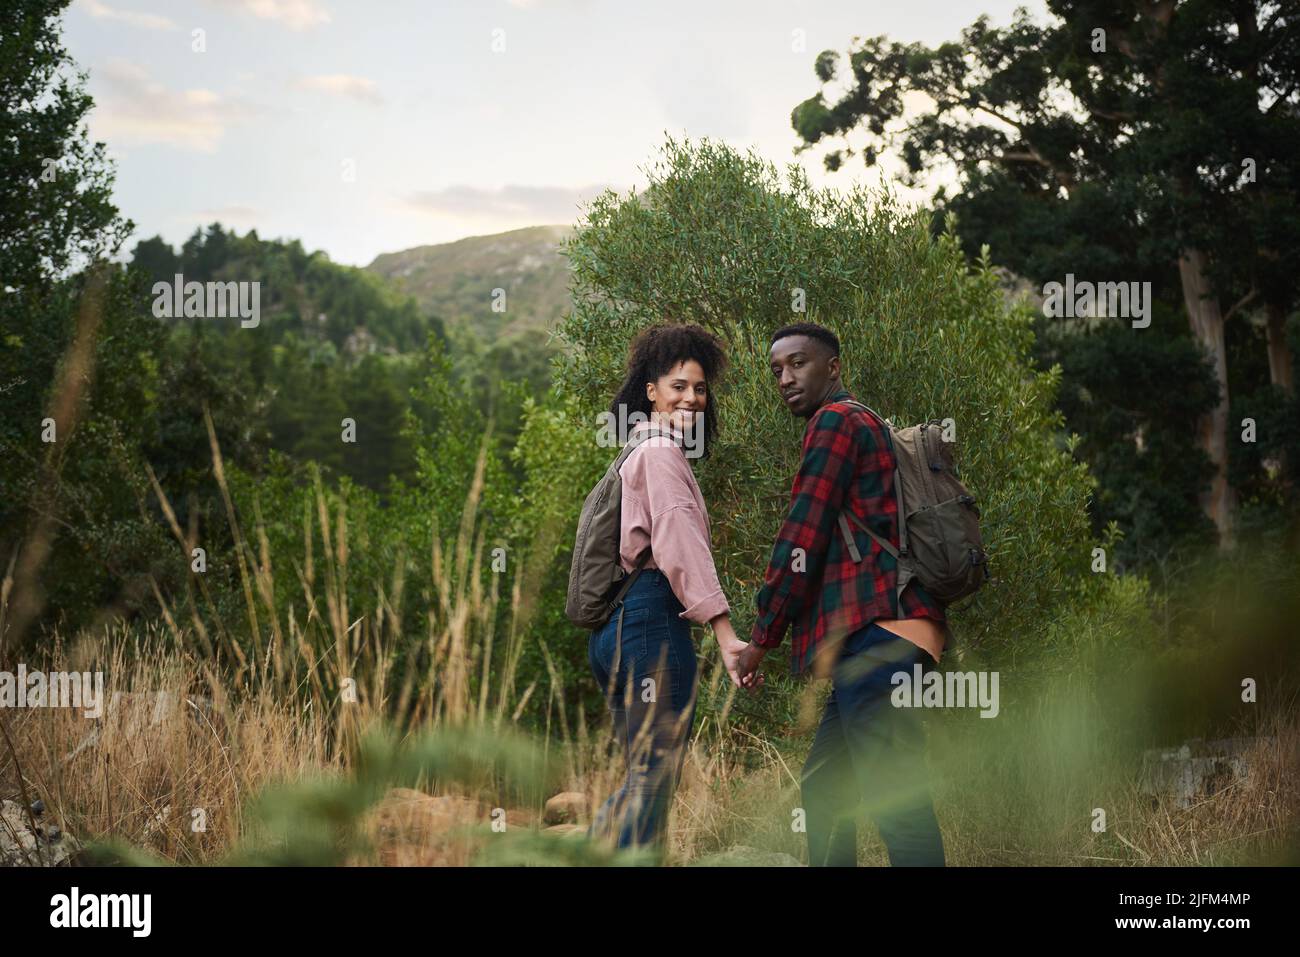 Smiling young multiethnic couple out for a hike together in some hills Stock Photo